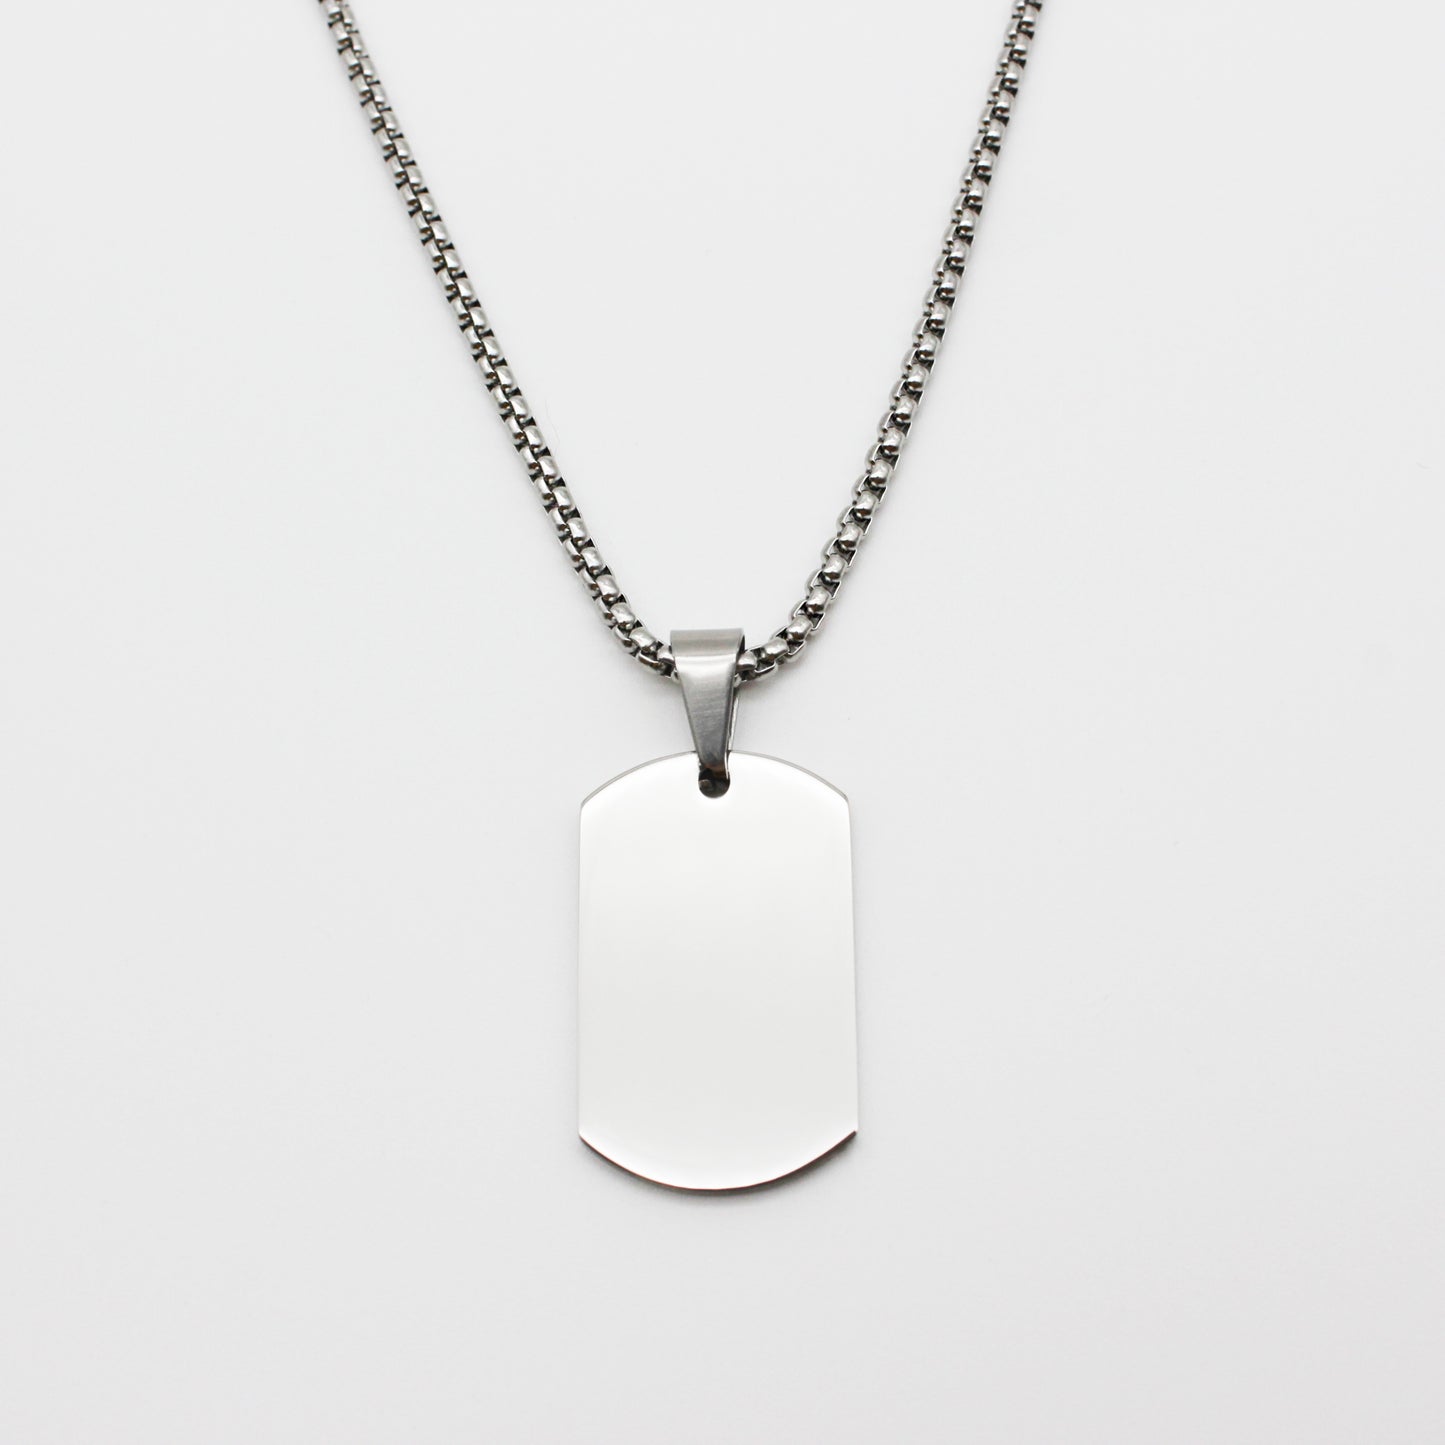 Dog Tag Necklace in Stainless Steel